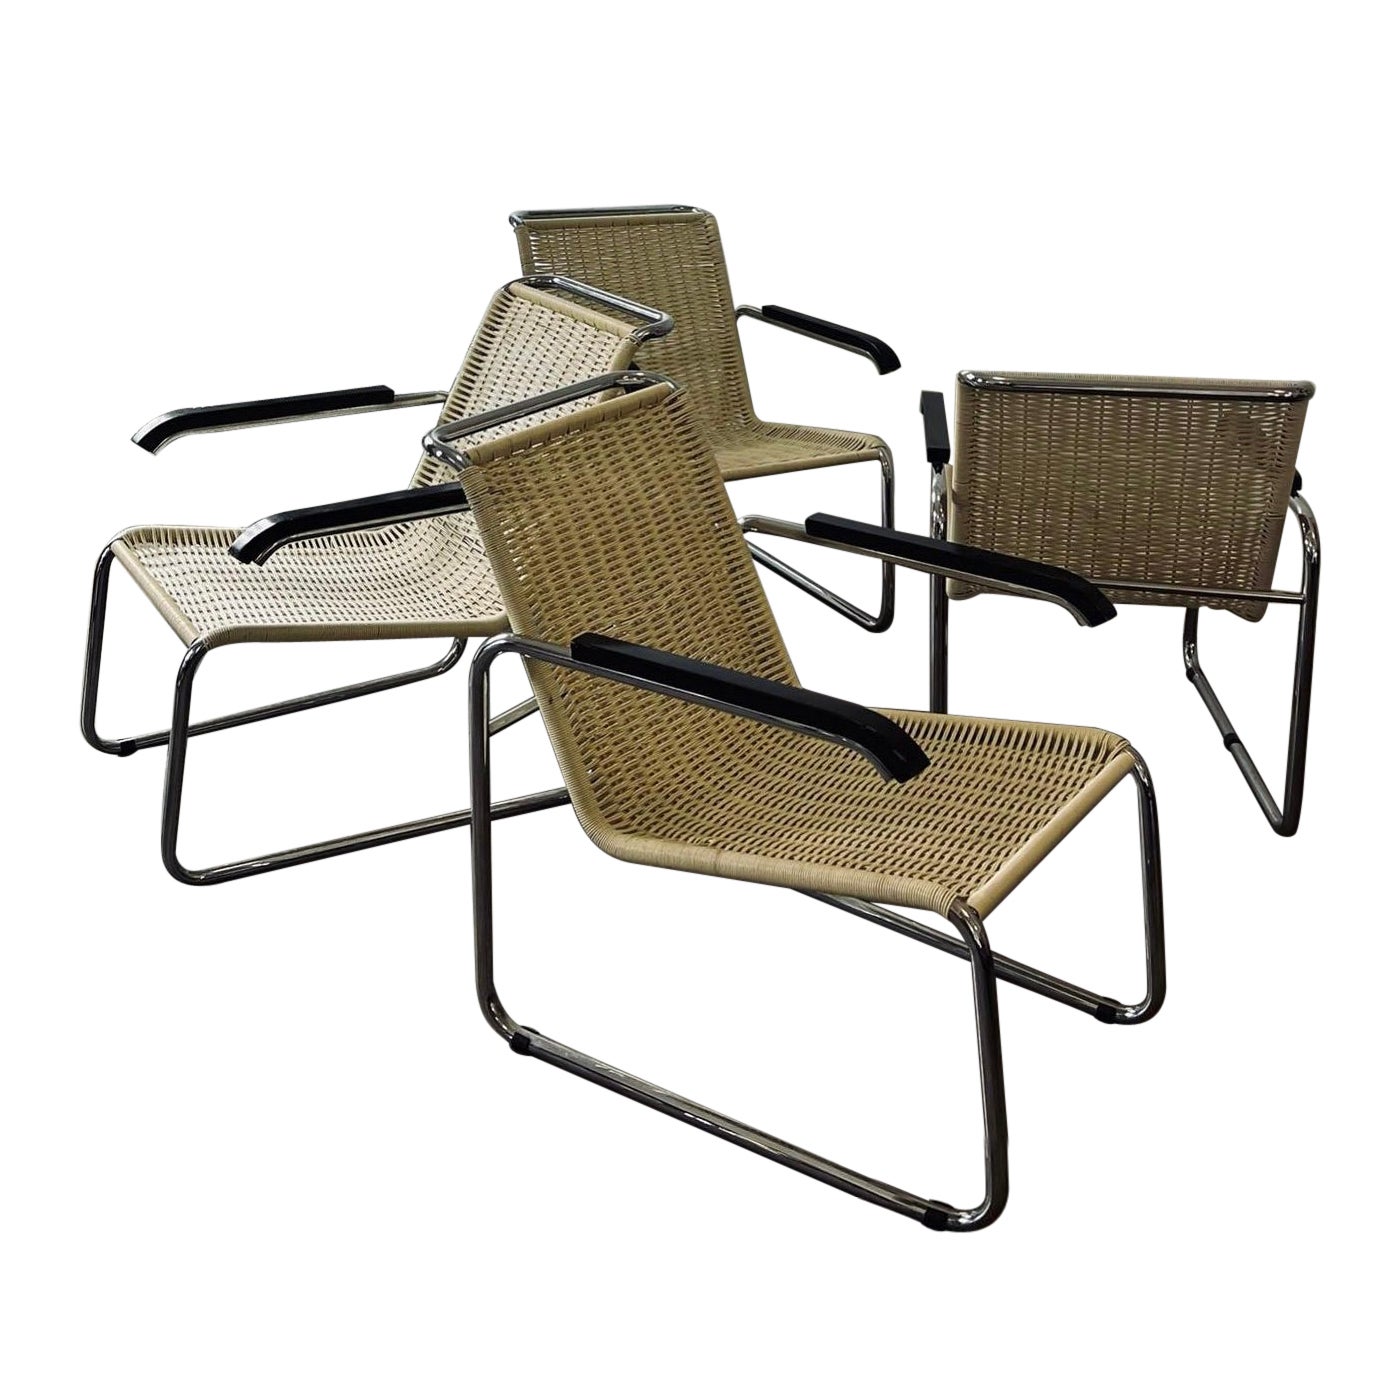 Iconic Marcel Breuer "B35" Chrome and Cane Lounge Chairs For Sale